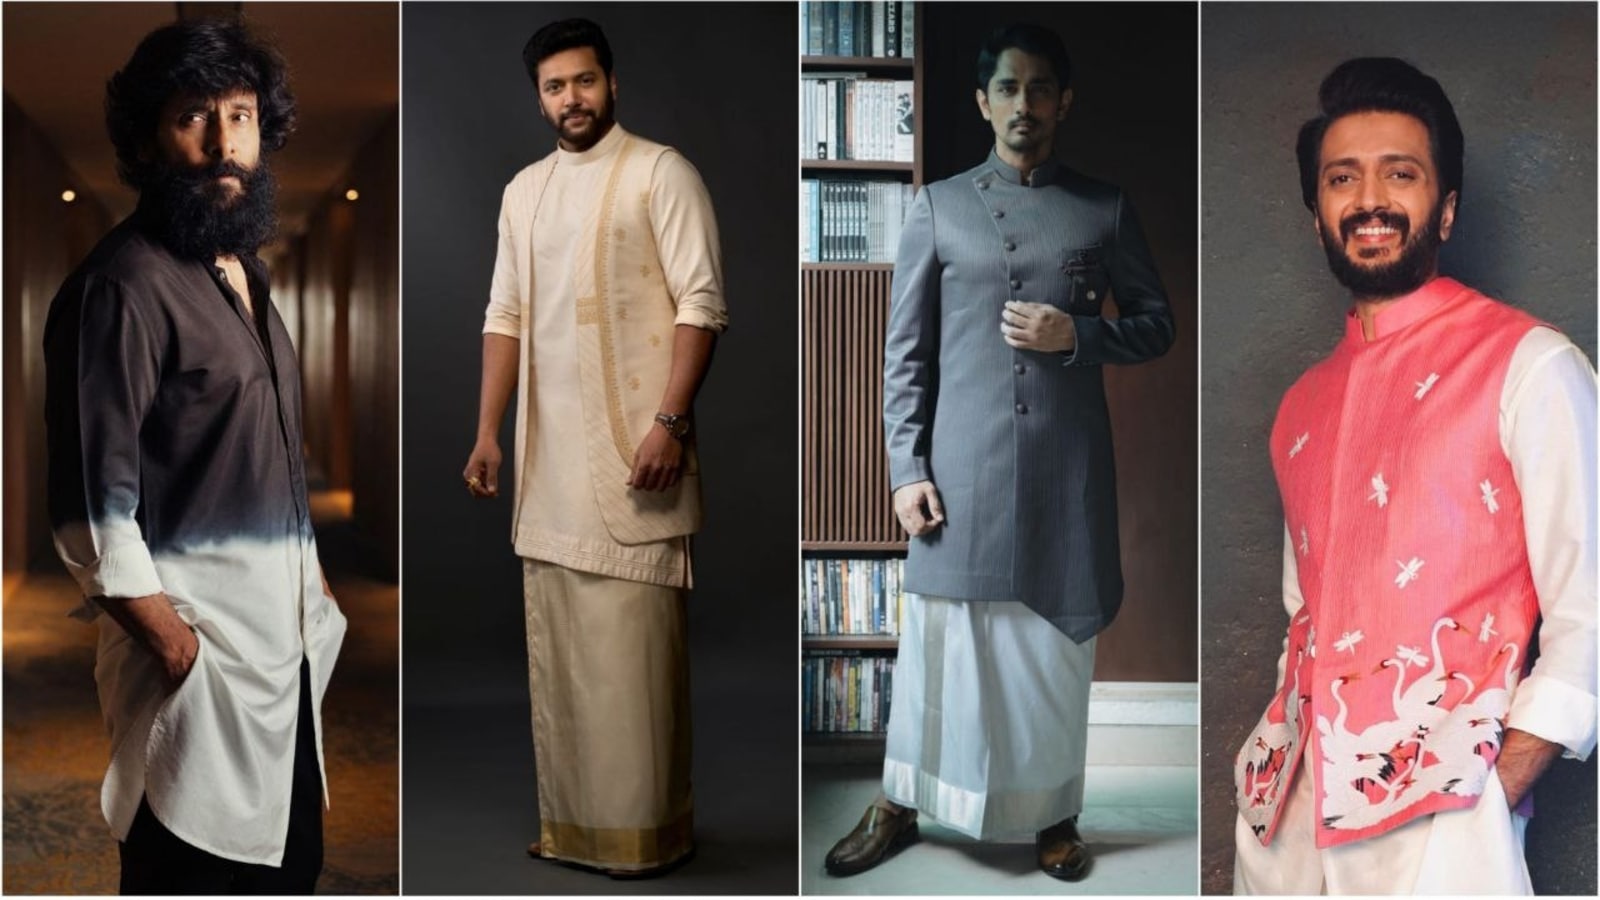 Buy Classic Ethnic Wear for Men in this Winter - Nihal Fashions Blog